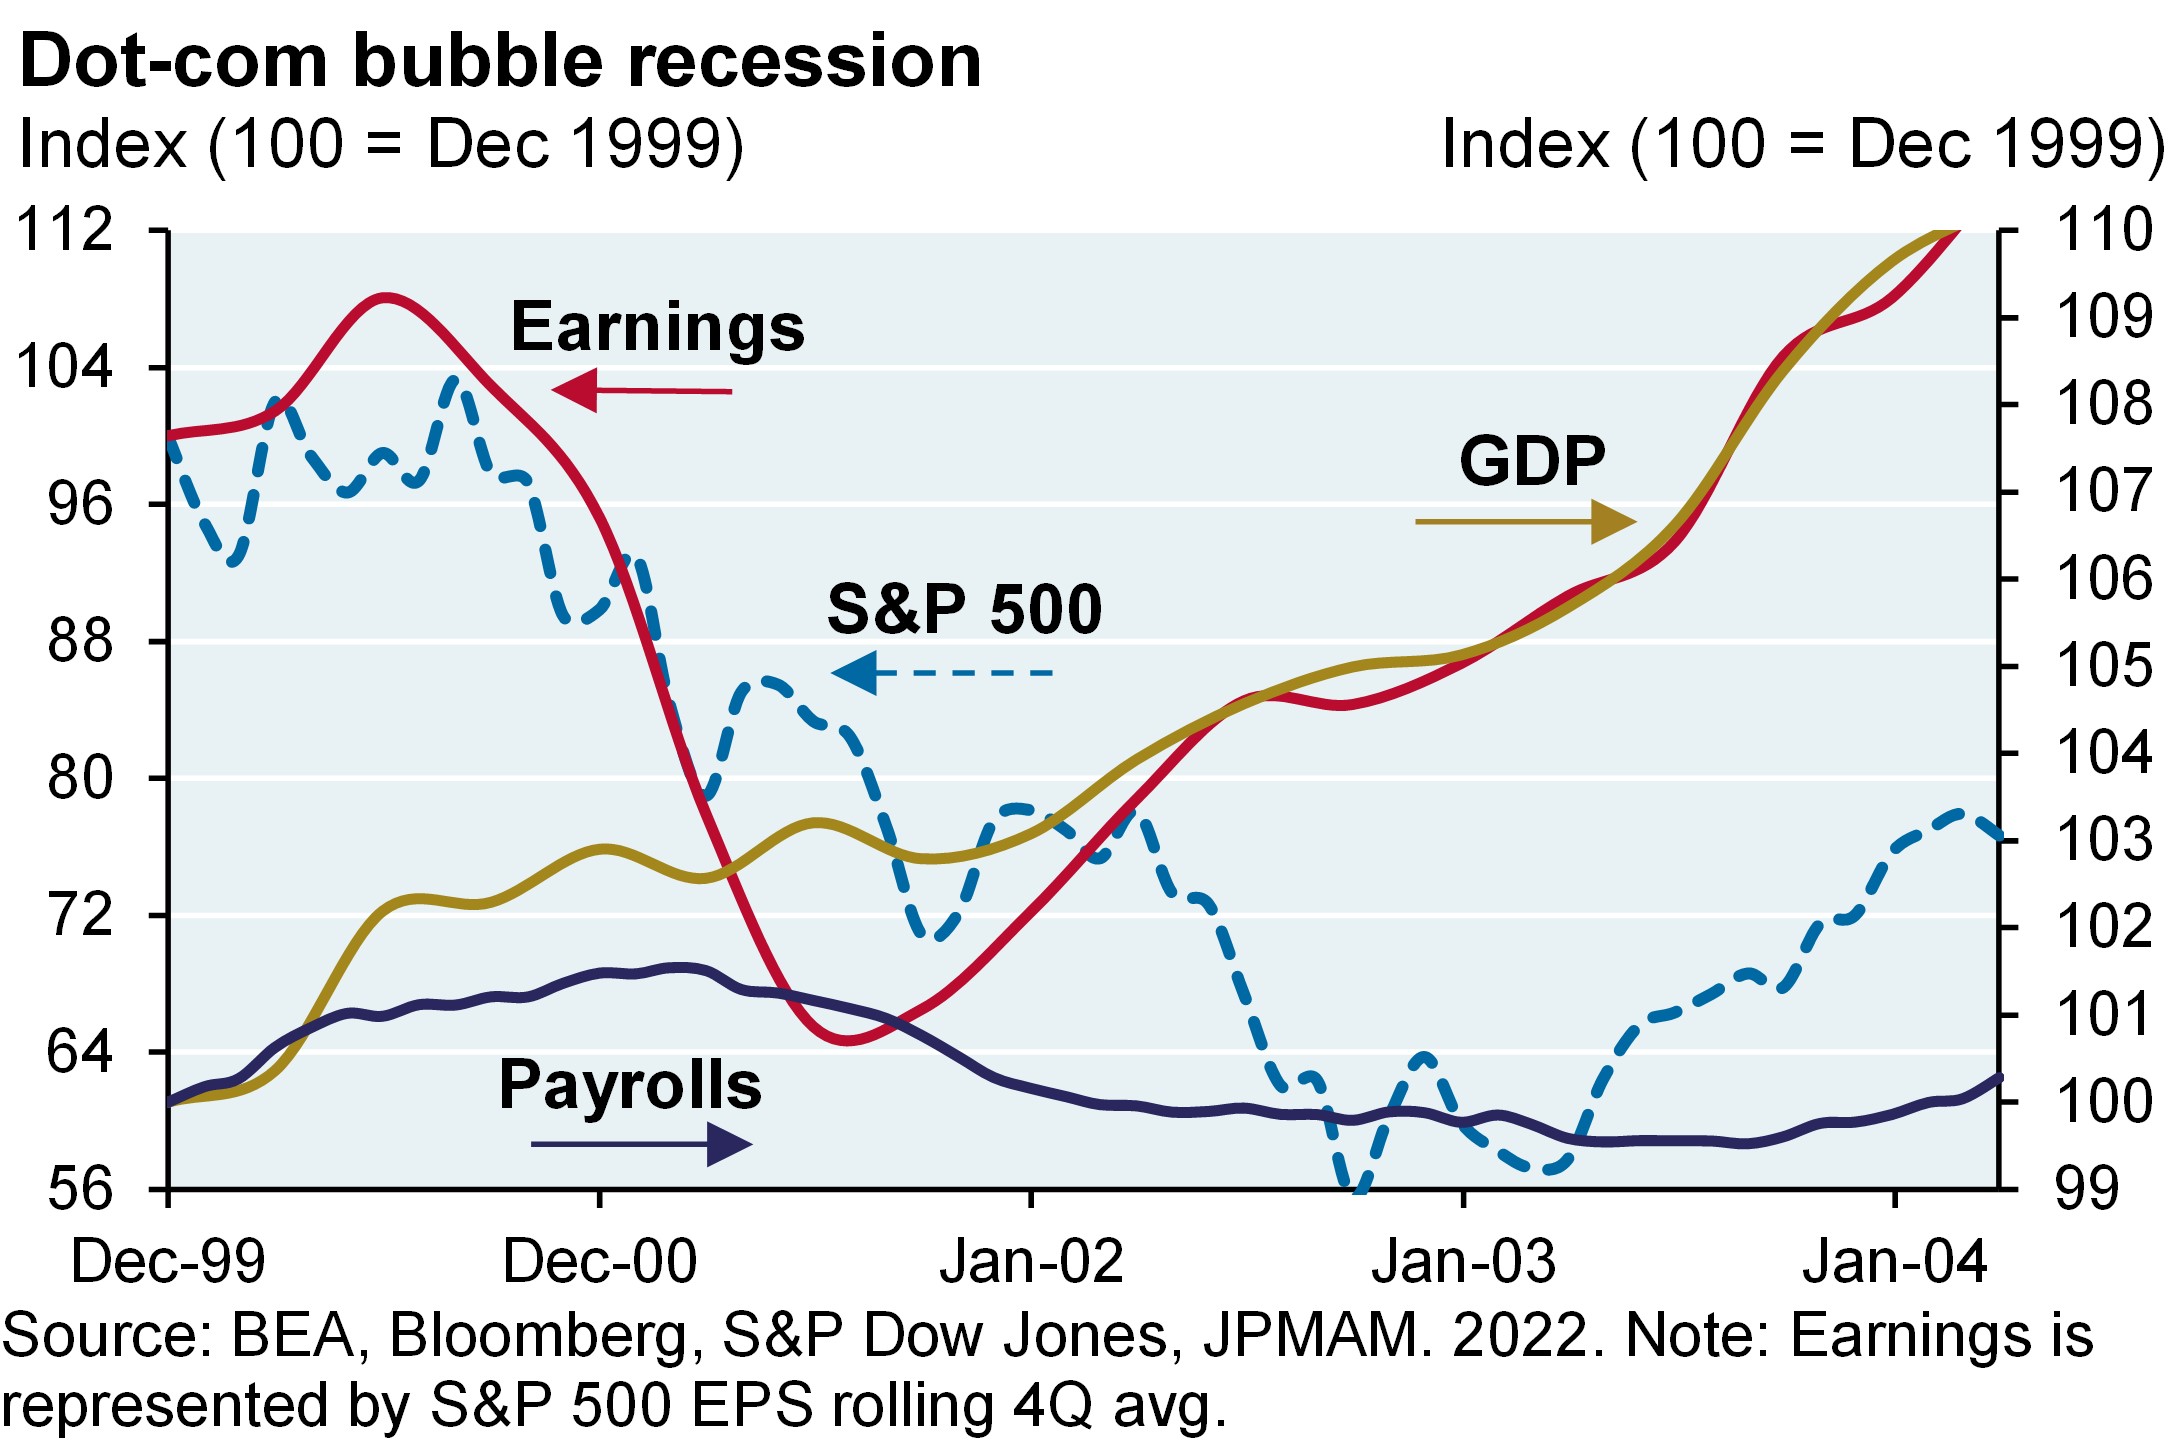 The indexed line chart compares the S&P 500, GDP, Earnings, and Nonfarm Payrolls throughout the dot-com bubble recession from December 1999 to March 2004. Earnings bottomed in June 2001, followed by the S&P 500 in September 2002. However, GDP bottomed in March 2001, while Payrolls began declining in April 2001.